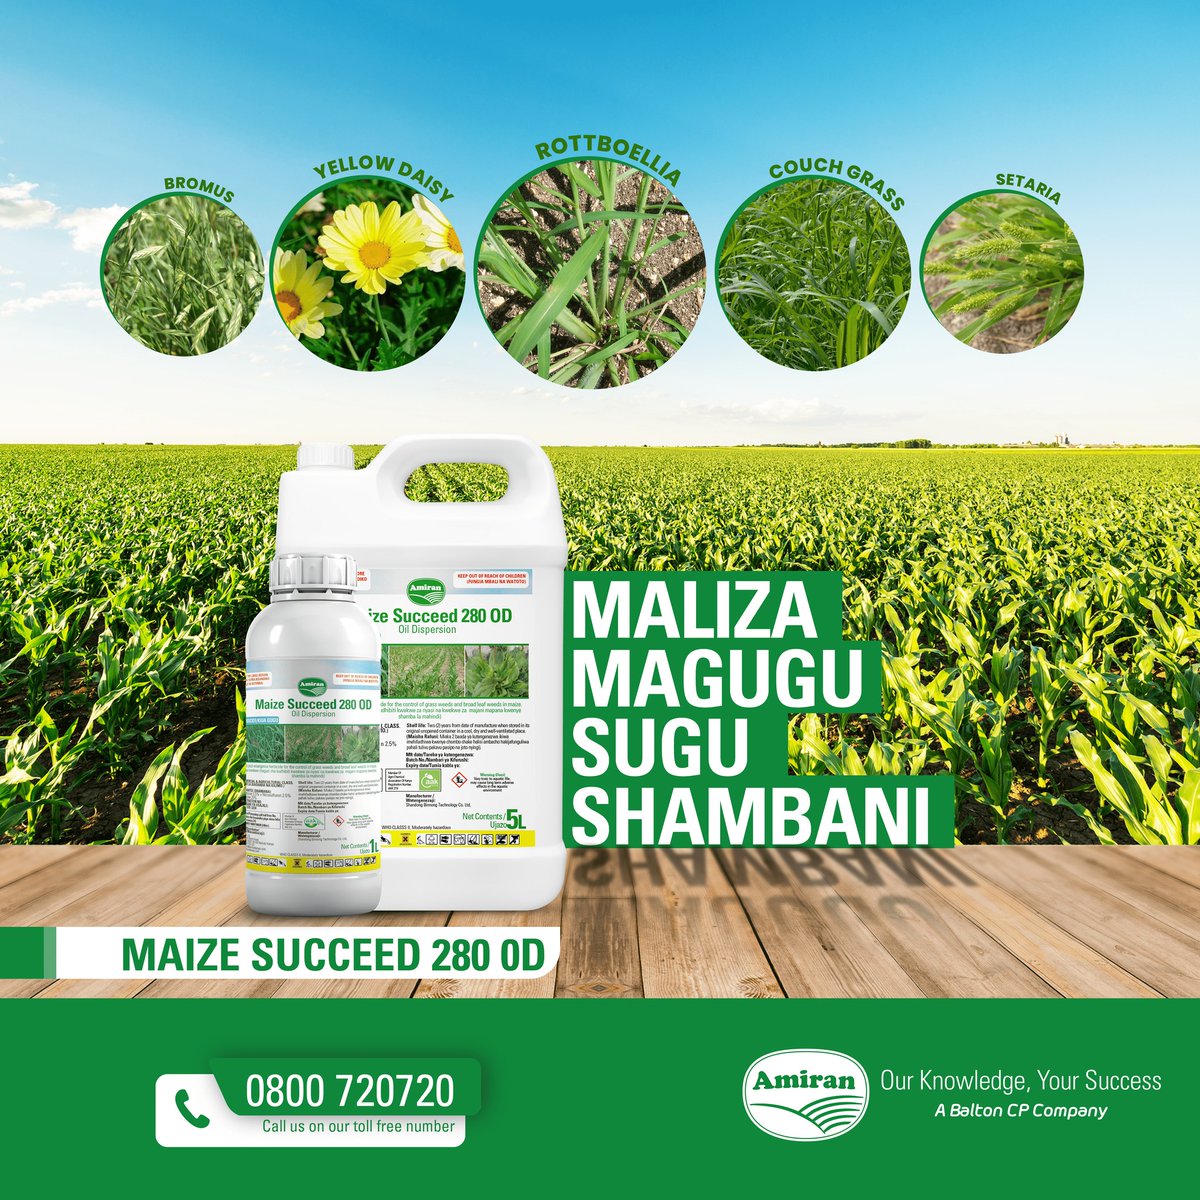 Ensure your maize crops thrive without unwanted competition with Maize Succeed 280 0D! Maize Succeed 280 0D is an early post-emergence selective herbicide targeting both grass and broadleaf weeds, including the stubborn Sedges, Bromus, Rottboellia, Couch grass, and Setaria.